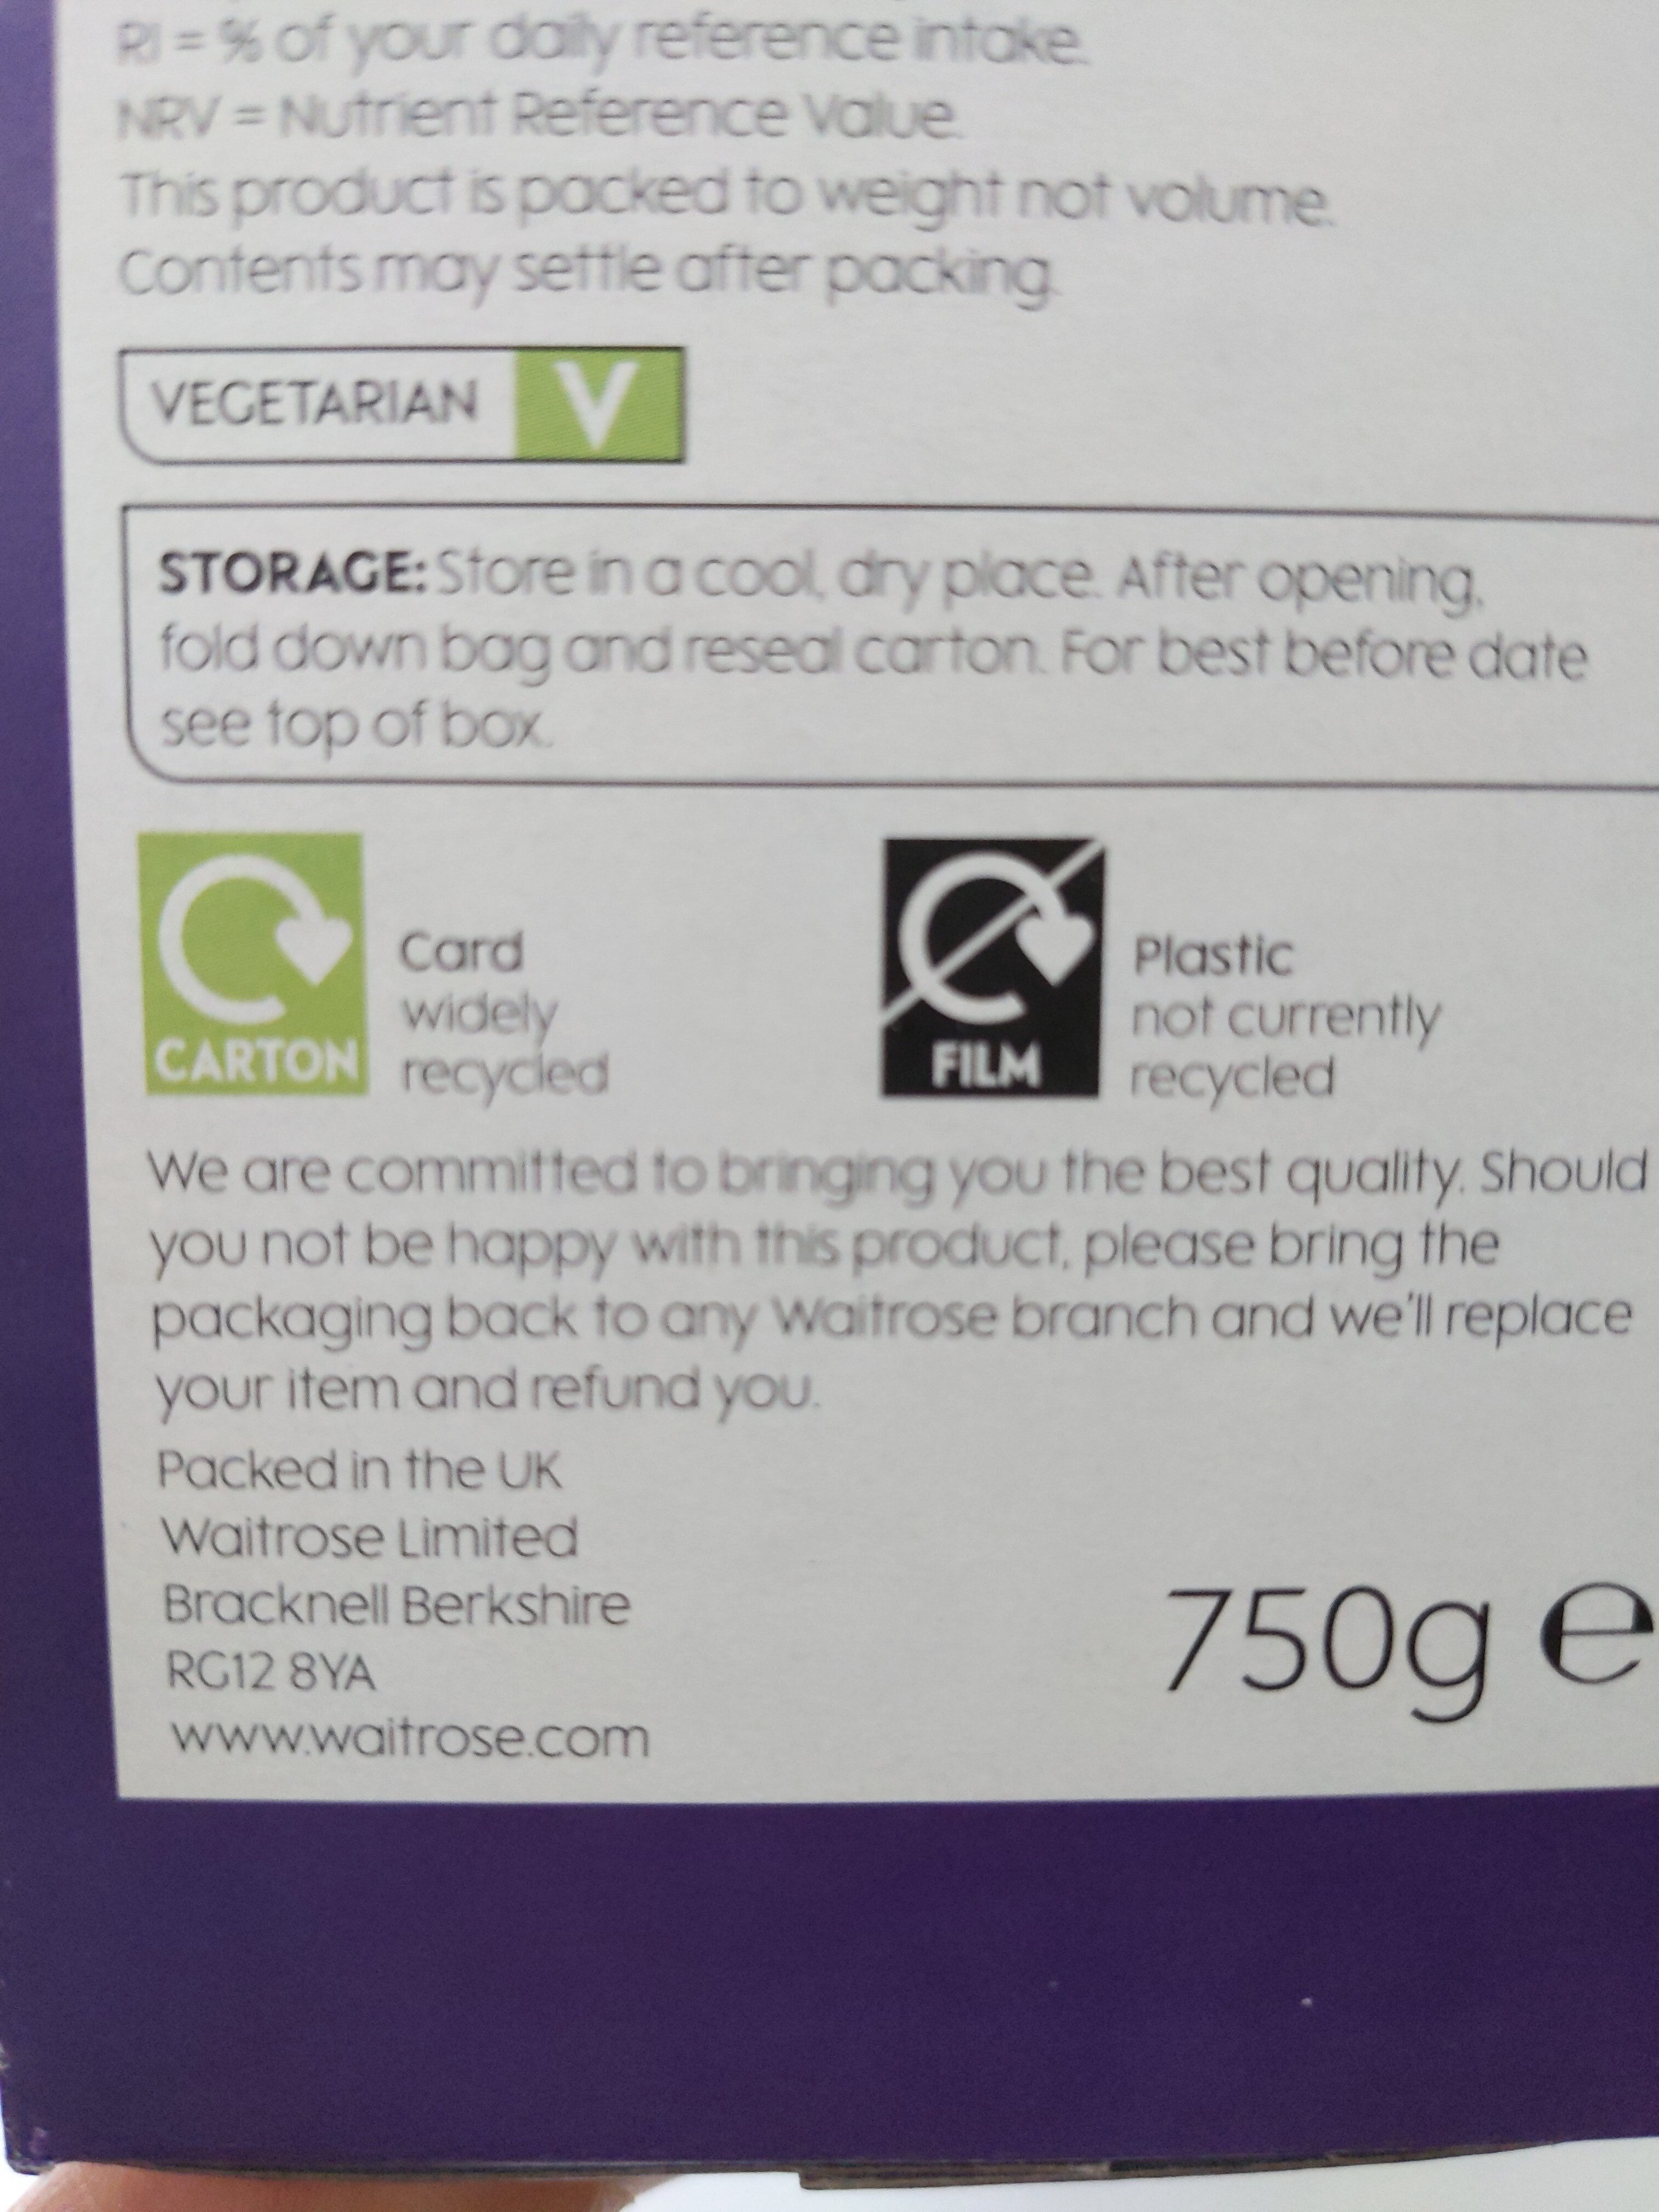 Wholegrain bran flakes - Recycling instructions and/or packaging information